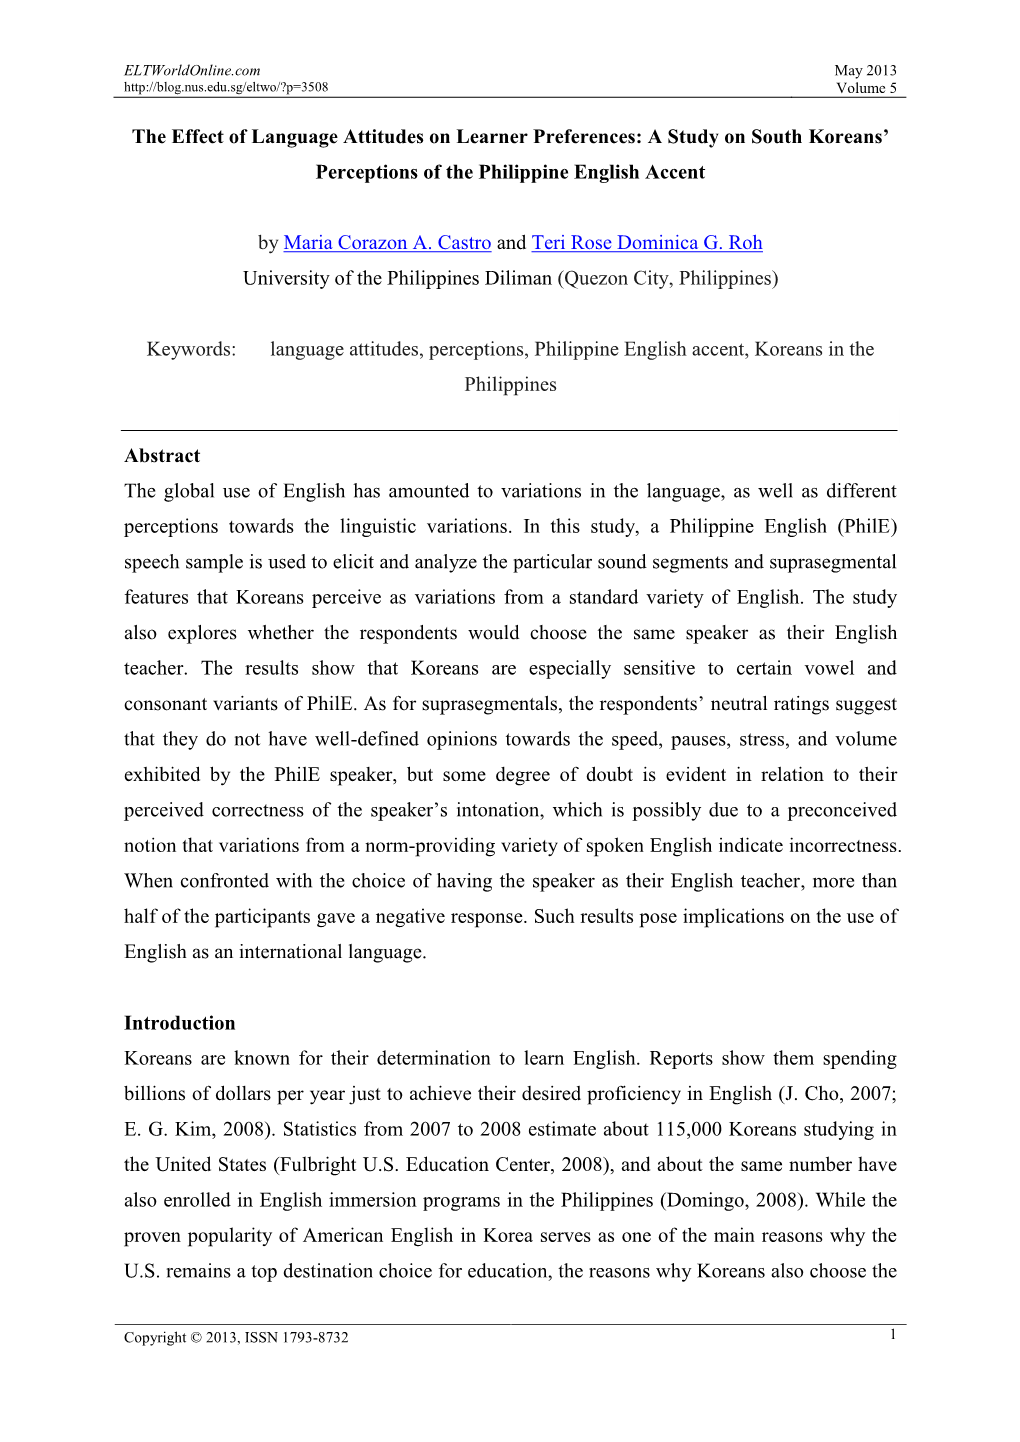 The Effect of Language Attitudes on Learner Preferences: a Study on South Koreans’ Perceptions of the Philippine English Accent